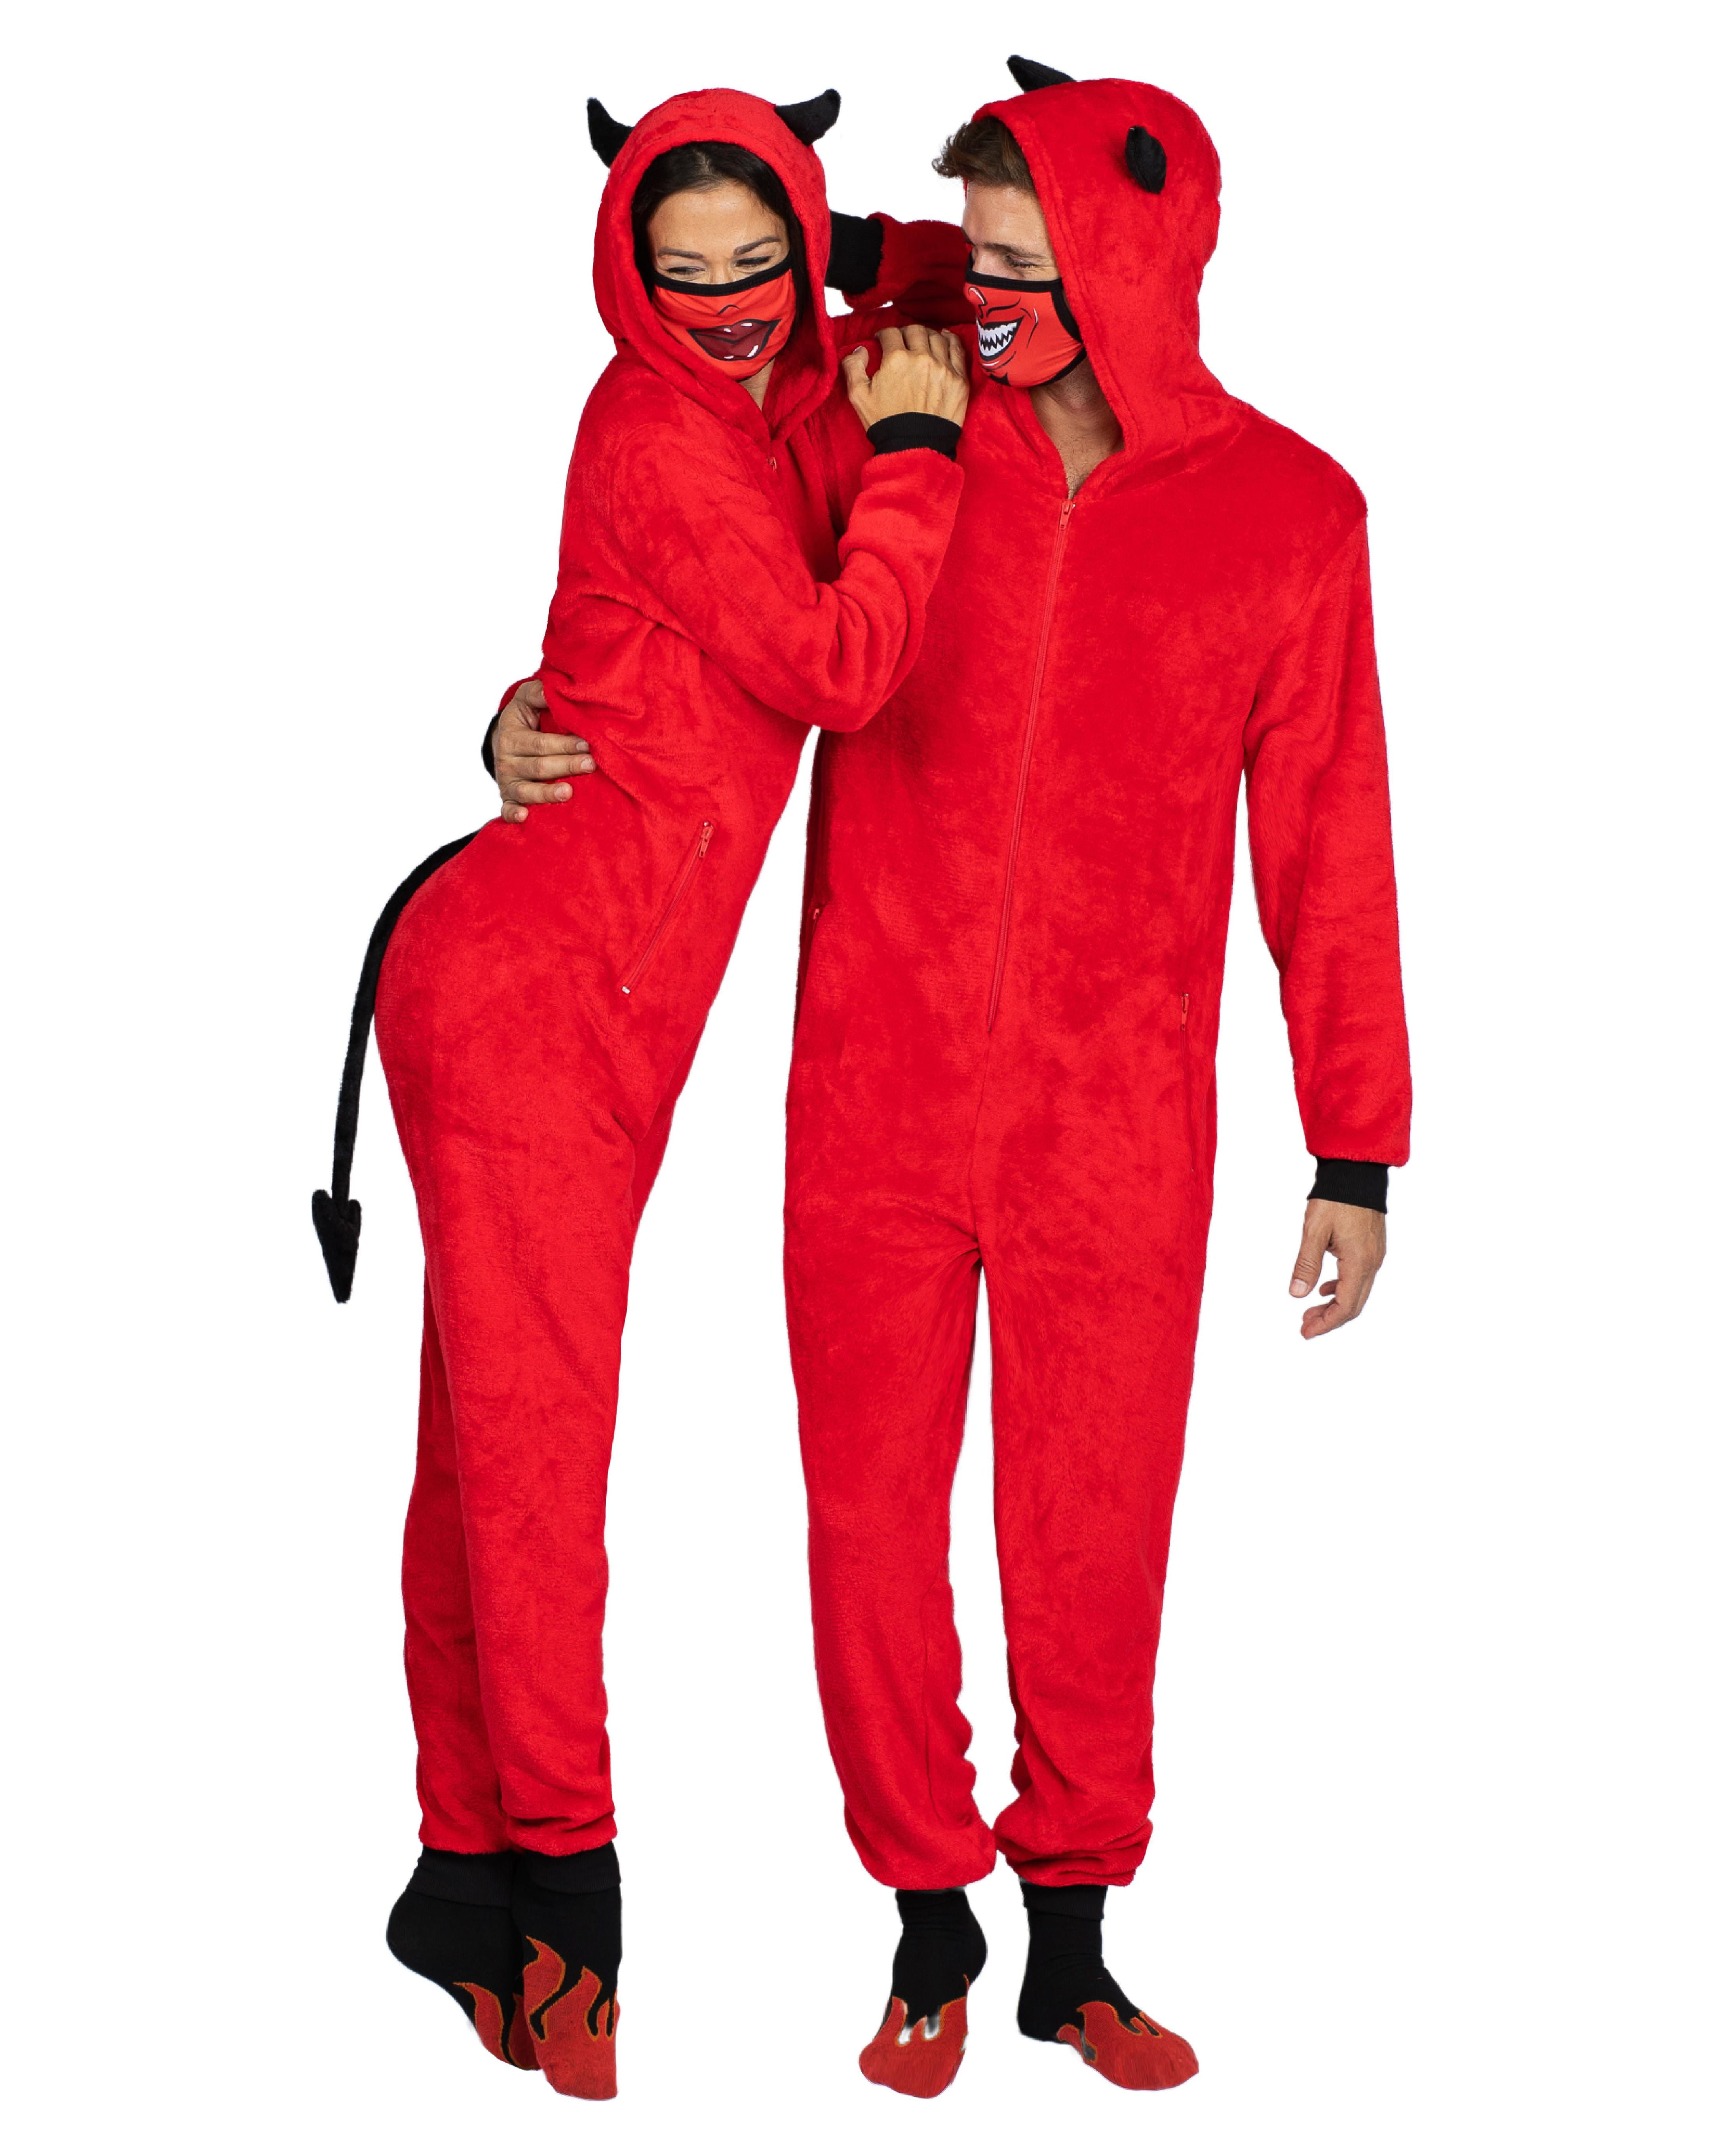 Holiday Matching Couples Costume Pajama Onesie With Socks and Mask, Ghost,  Devil, and Skeleton, Red Devil (Men), Size: 2X